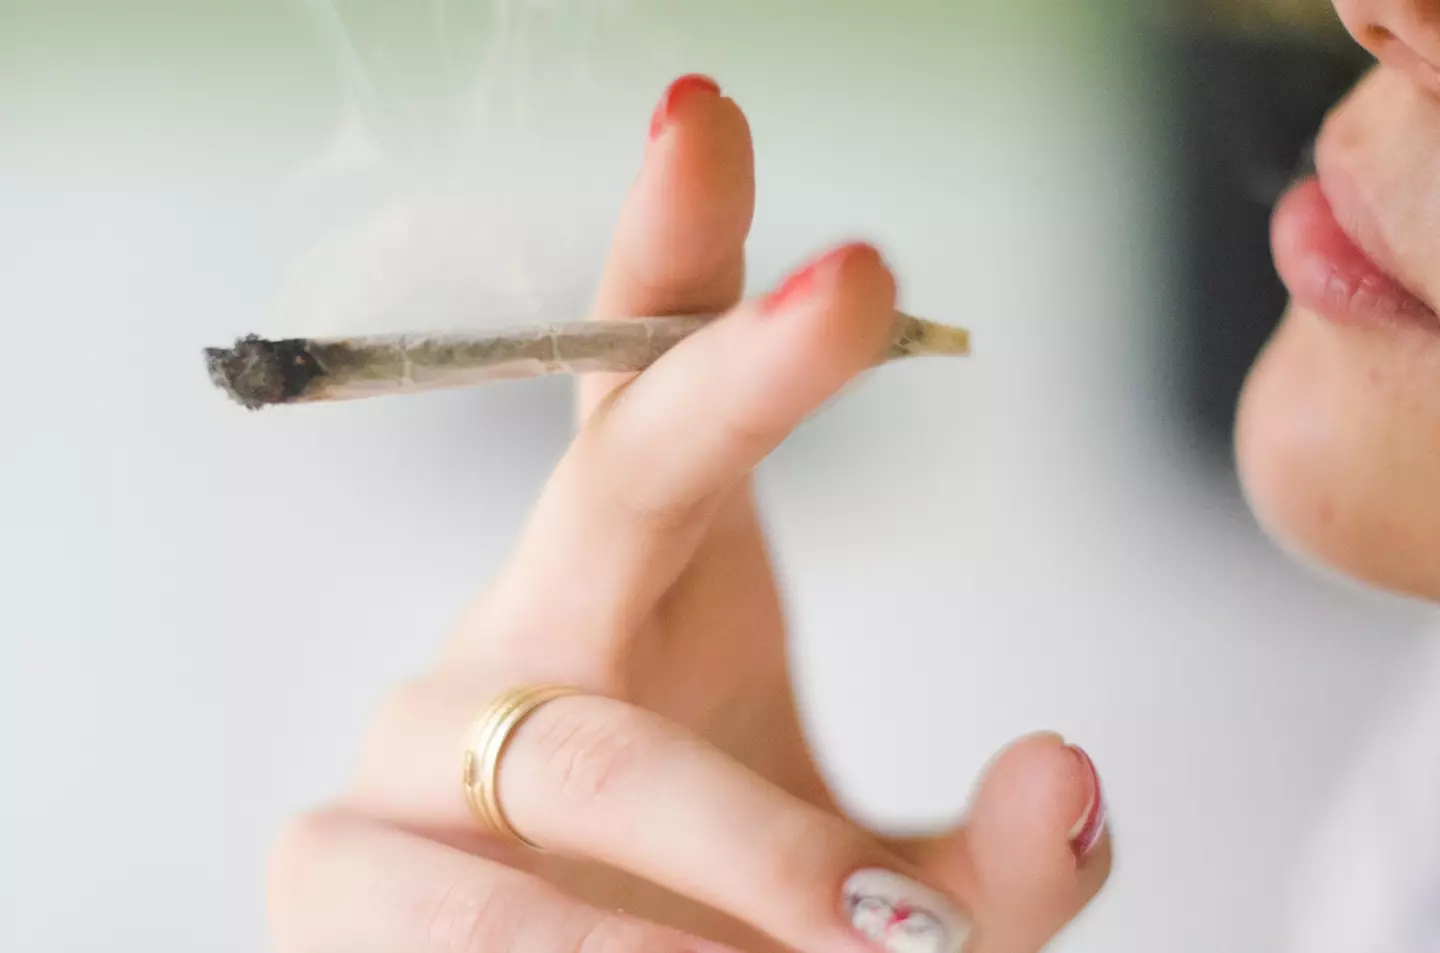 Some women say that weed has allowed them to achieve multiple orgasms.